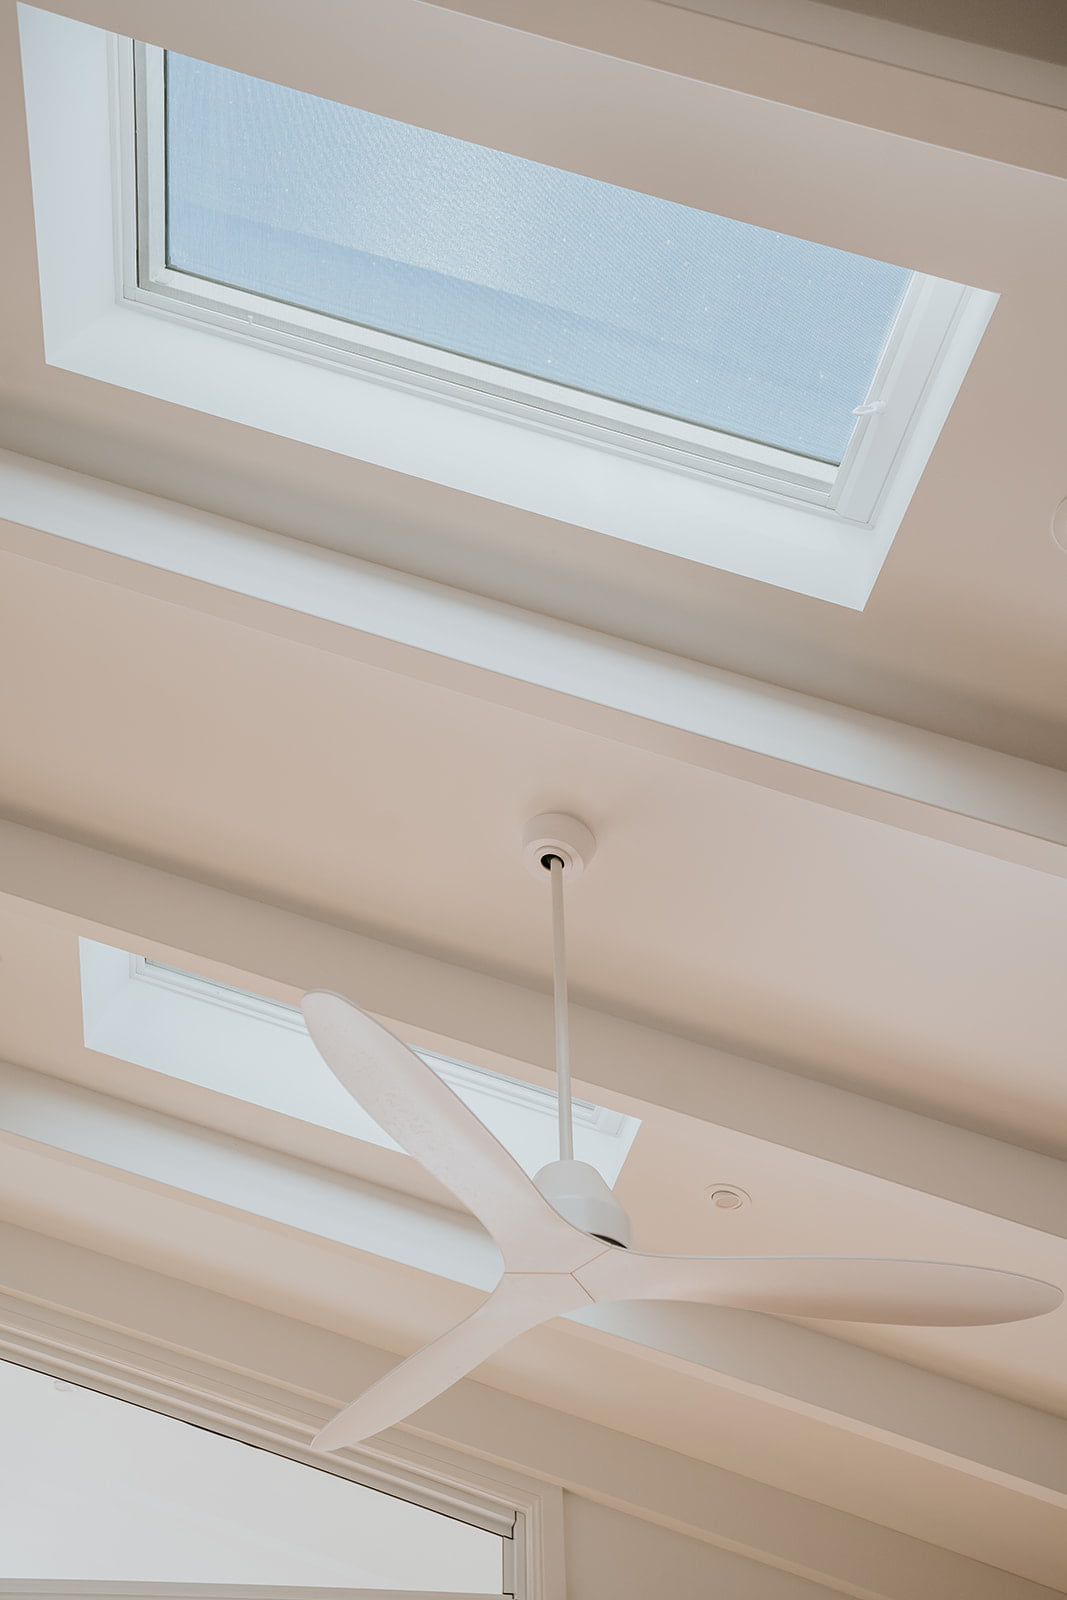 Raked ceilings with velux skylights and exposed rafters